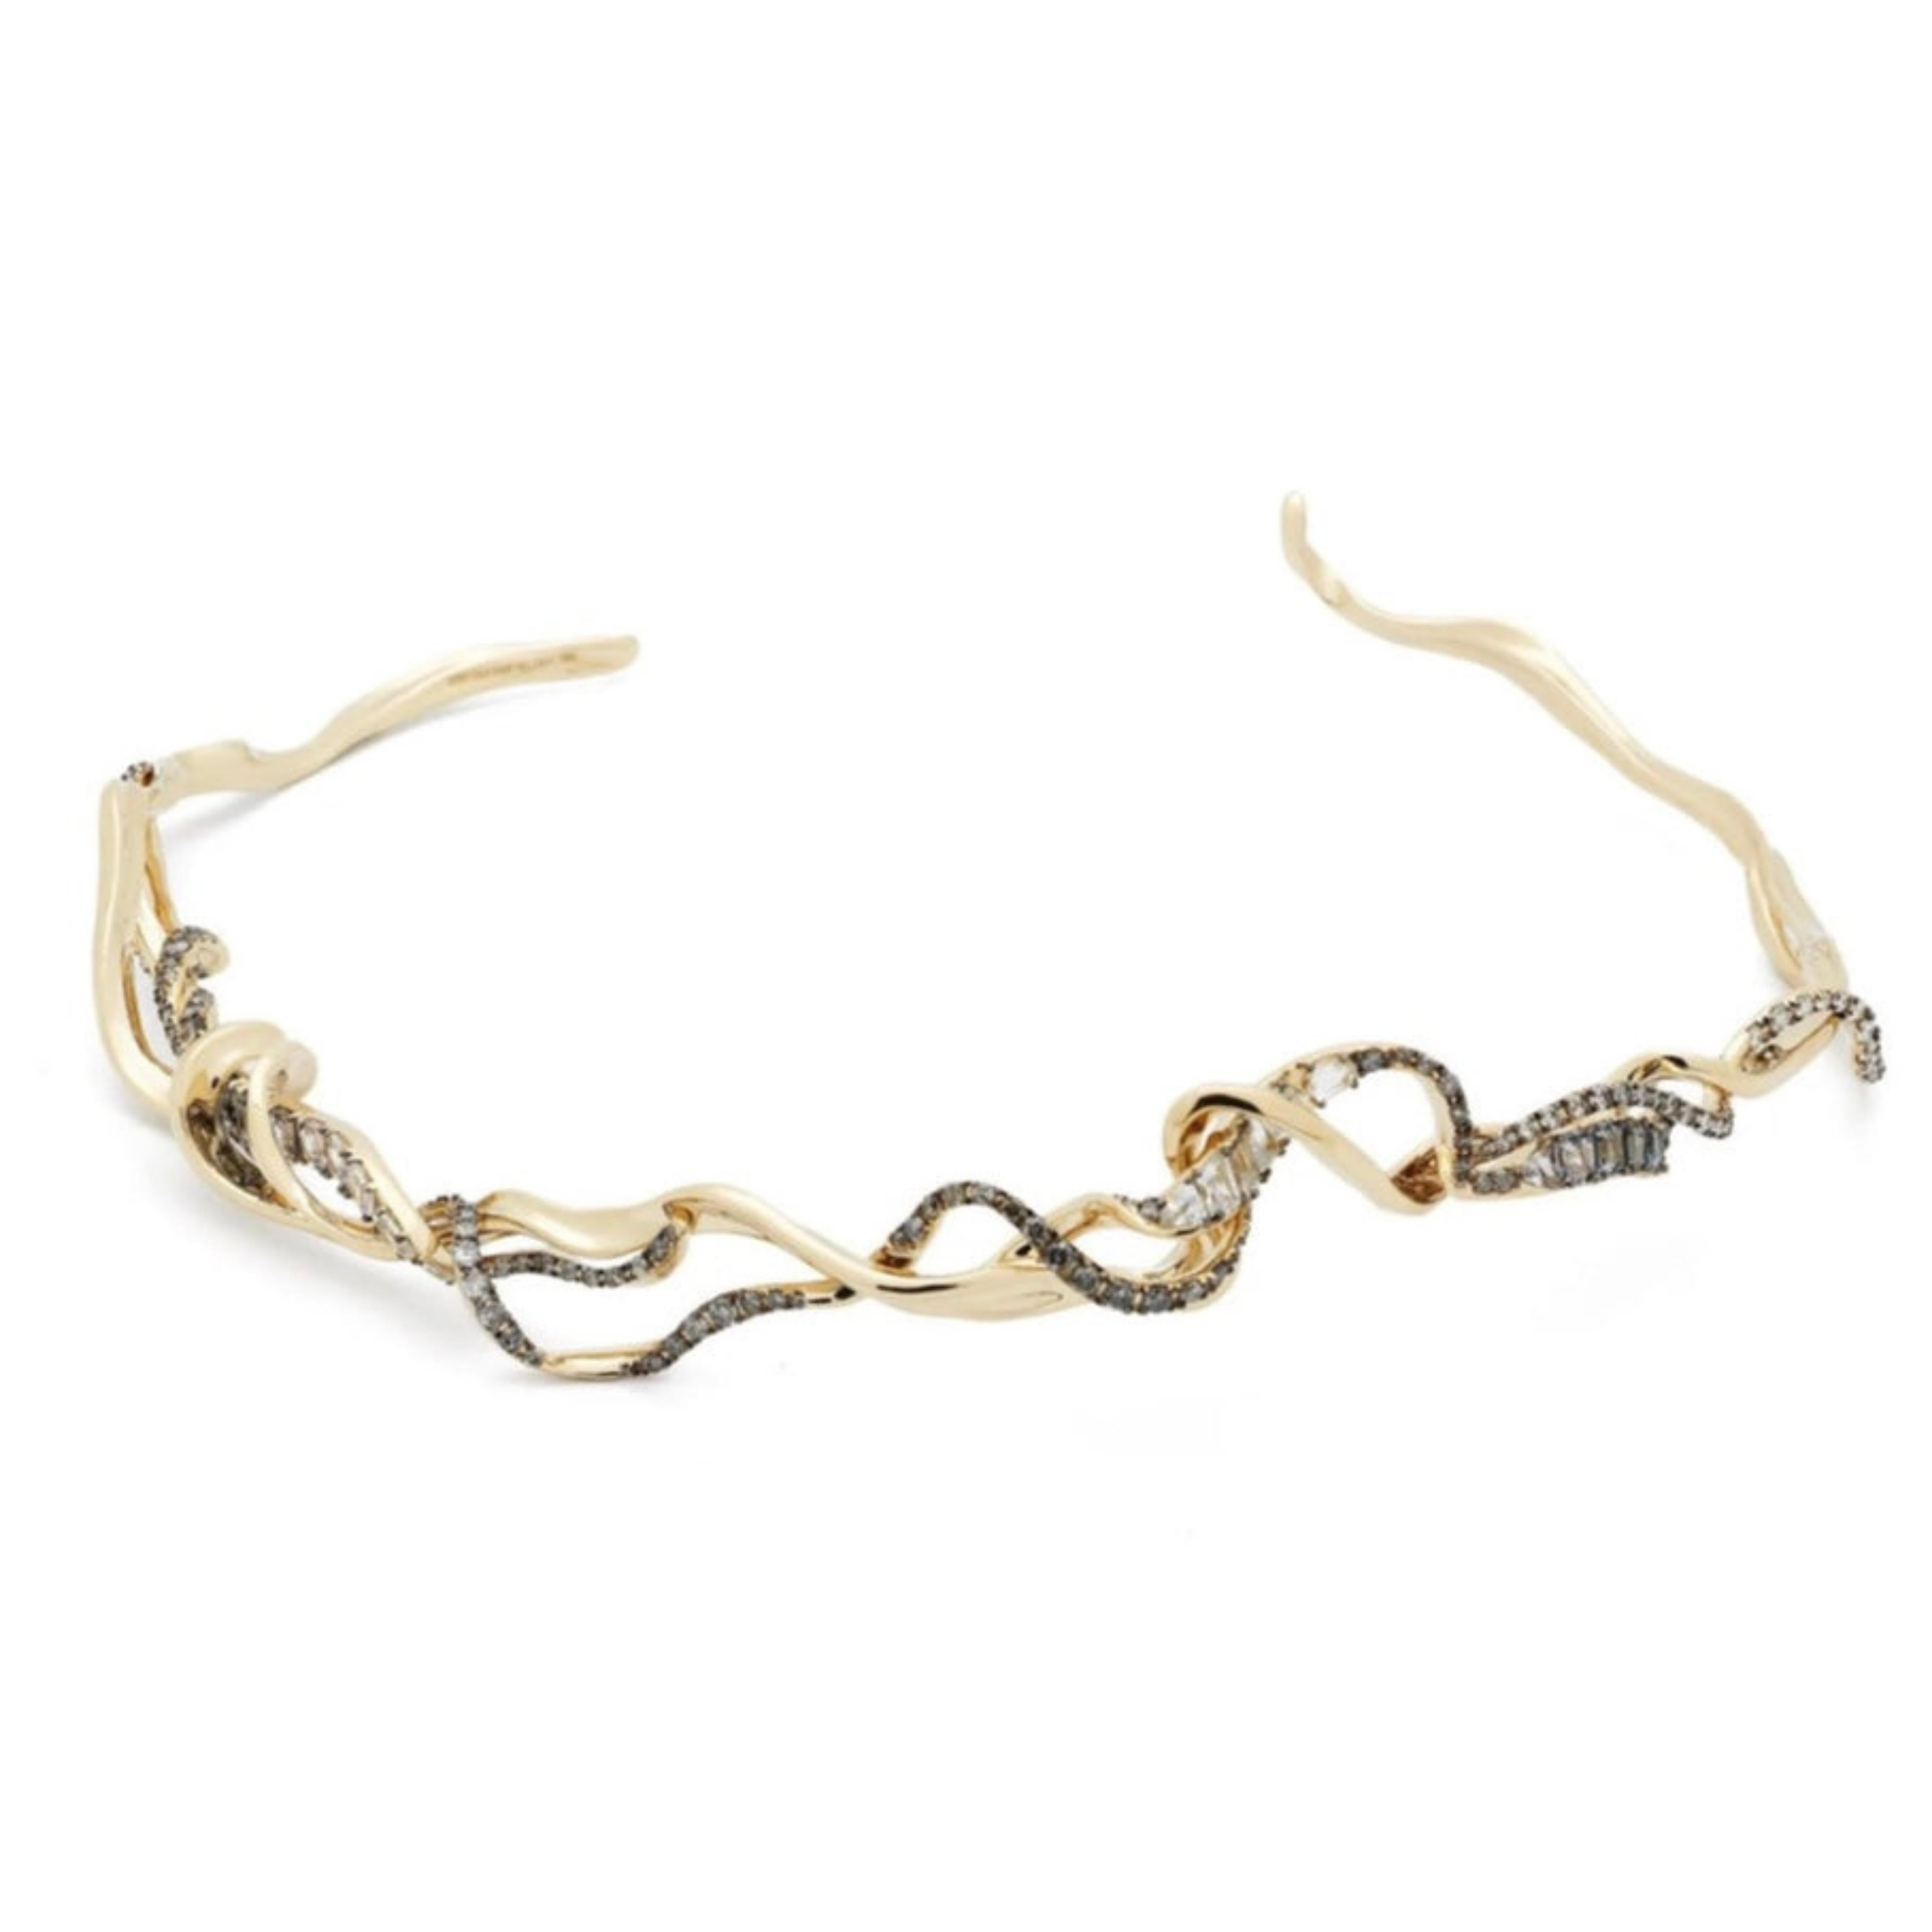 Bibi van der Velden Diamond Smoke Fume Choker. Fitted sold 18K gold choker style necklace with intertwining white diamonds, grey diamonds and spinels. Product photo shown from the front.